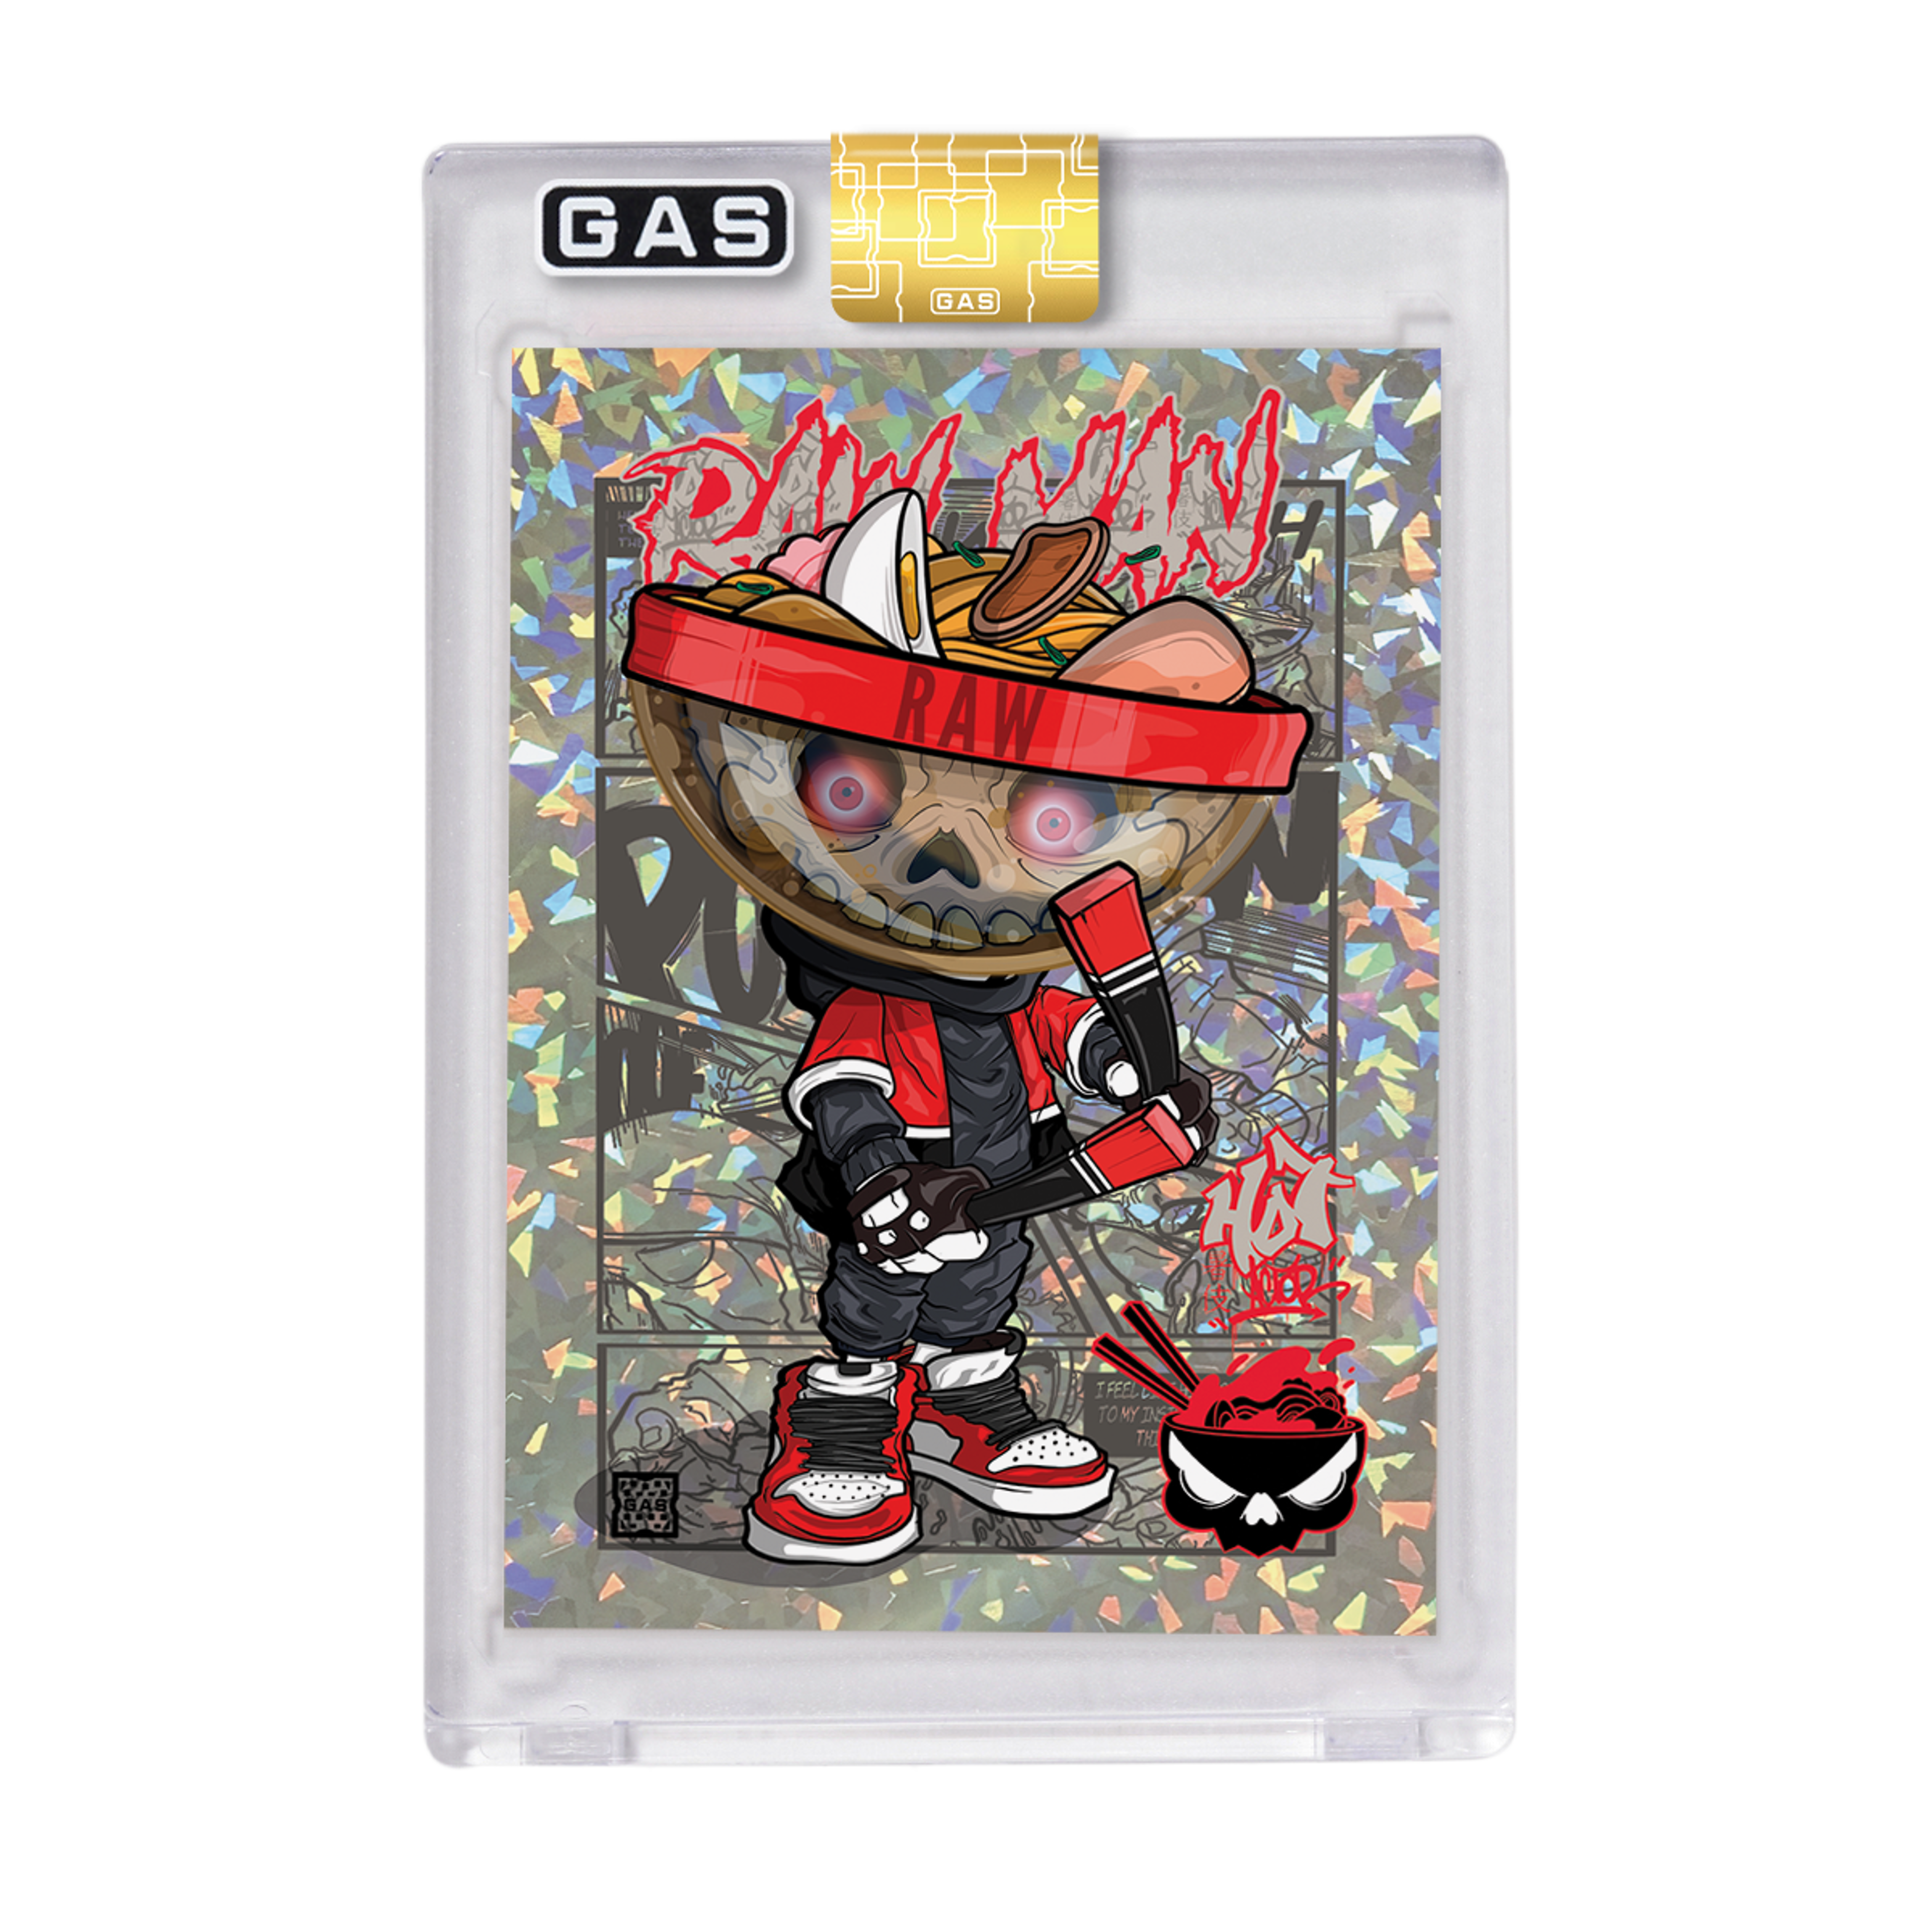 Limited Edition GAS Clutter Artist Series #3 RAW-MAN by Hot Acto